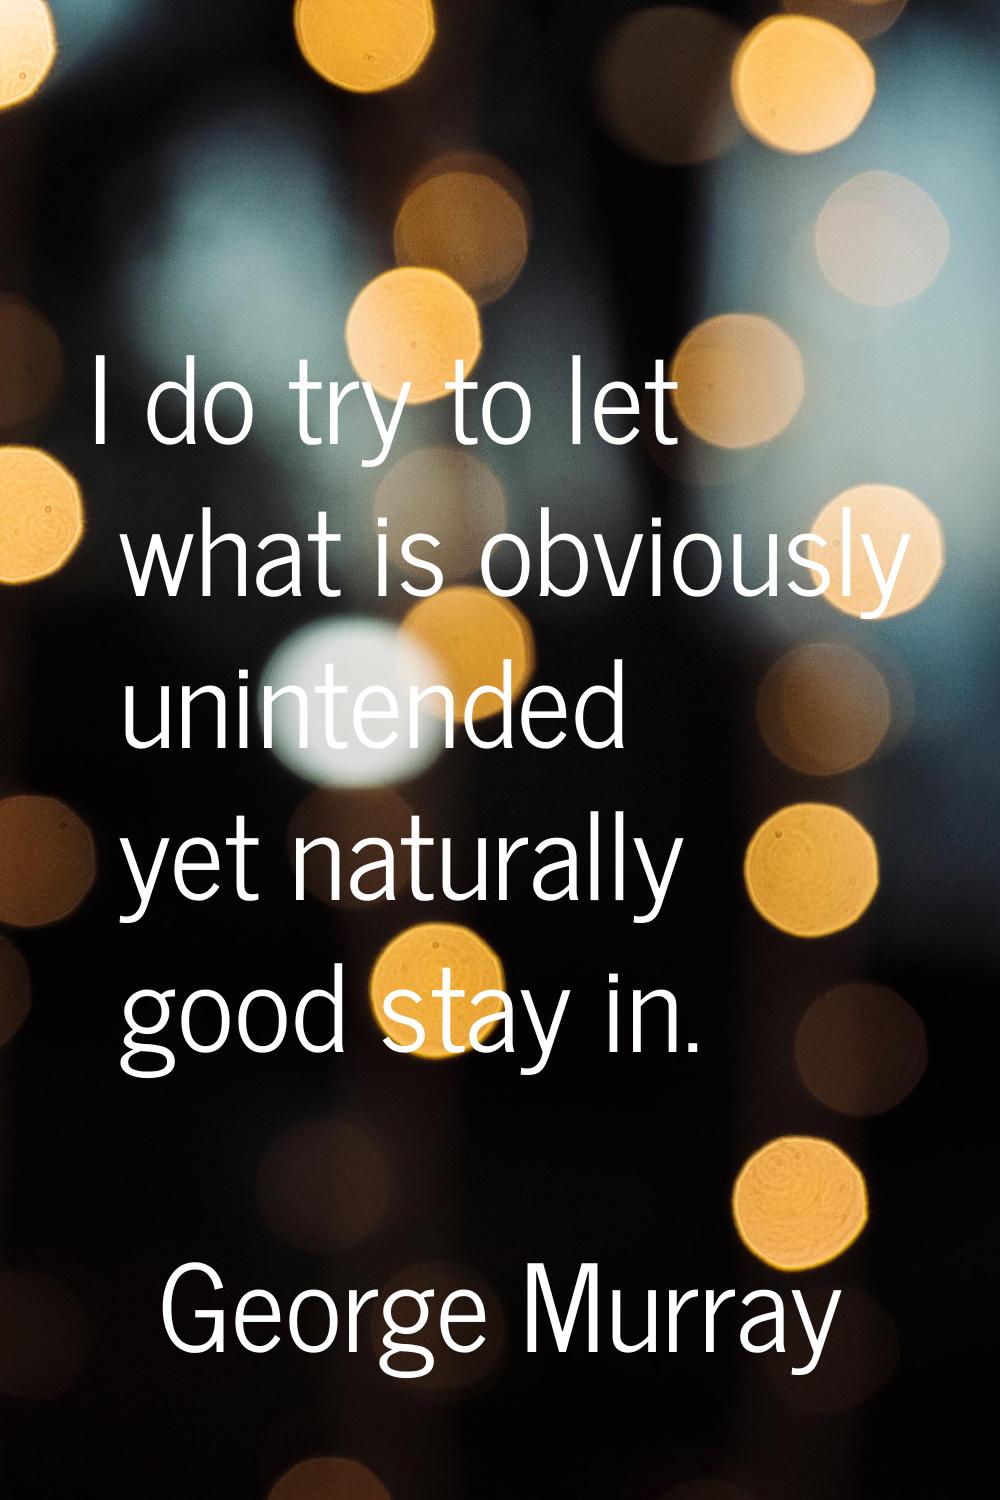 I do try to let what is obviously unintended yet naturally good stay in.